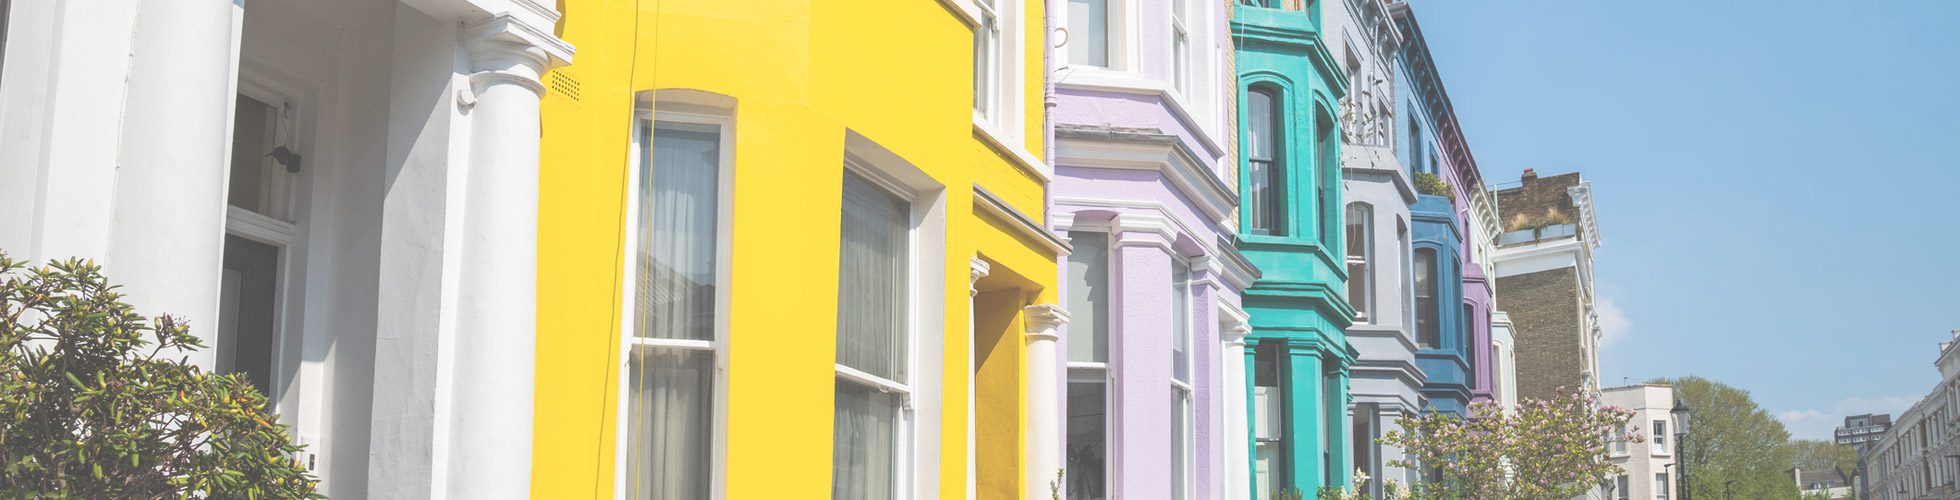 Image of row of houses in Notting Hill for Property tenure: I’m loving freehold instead blog